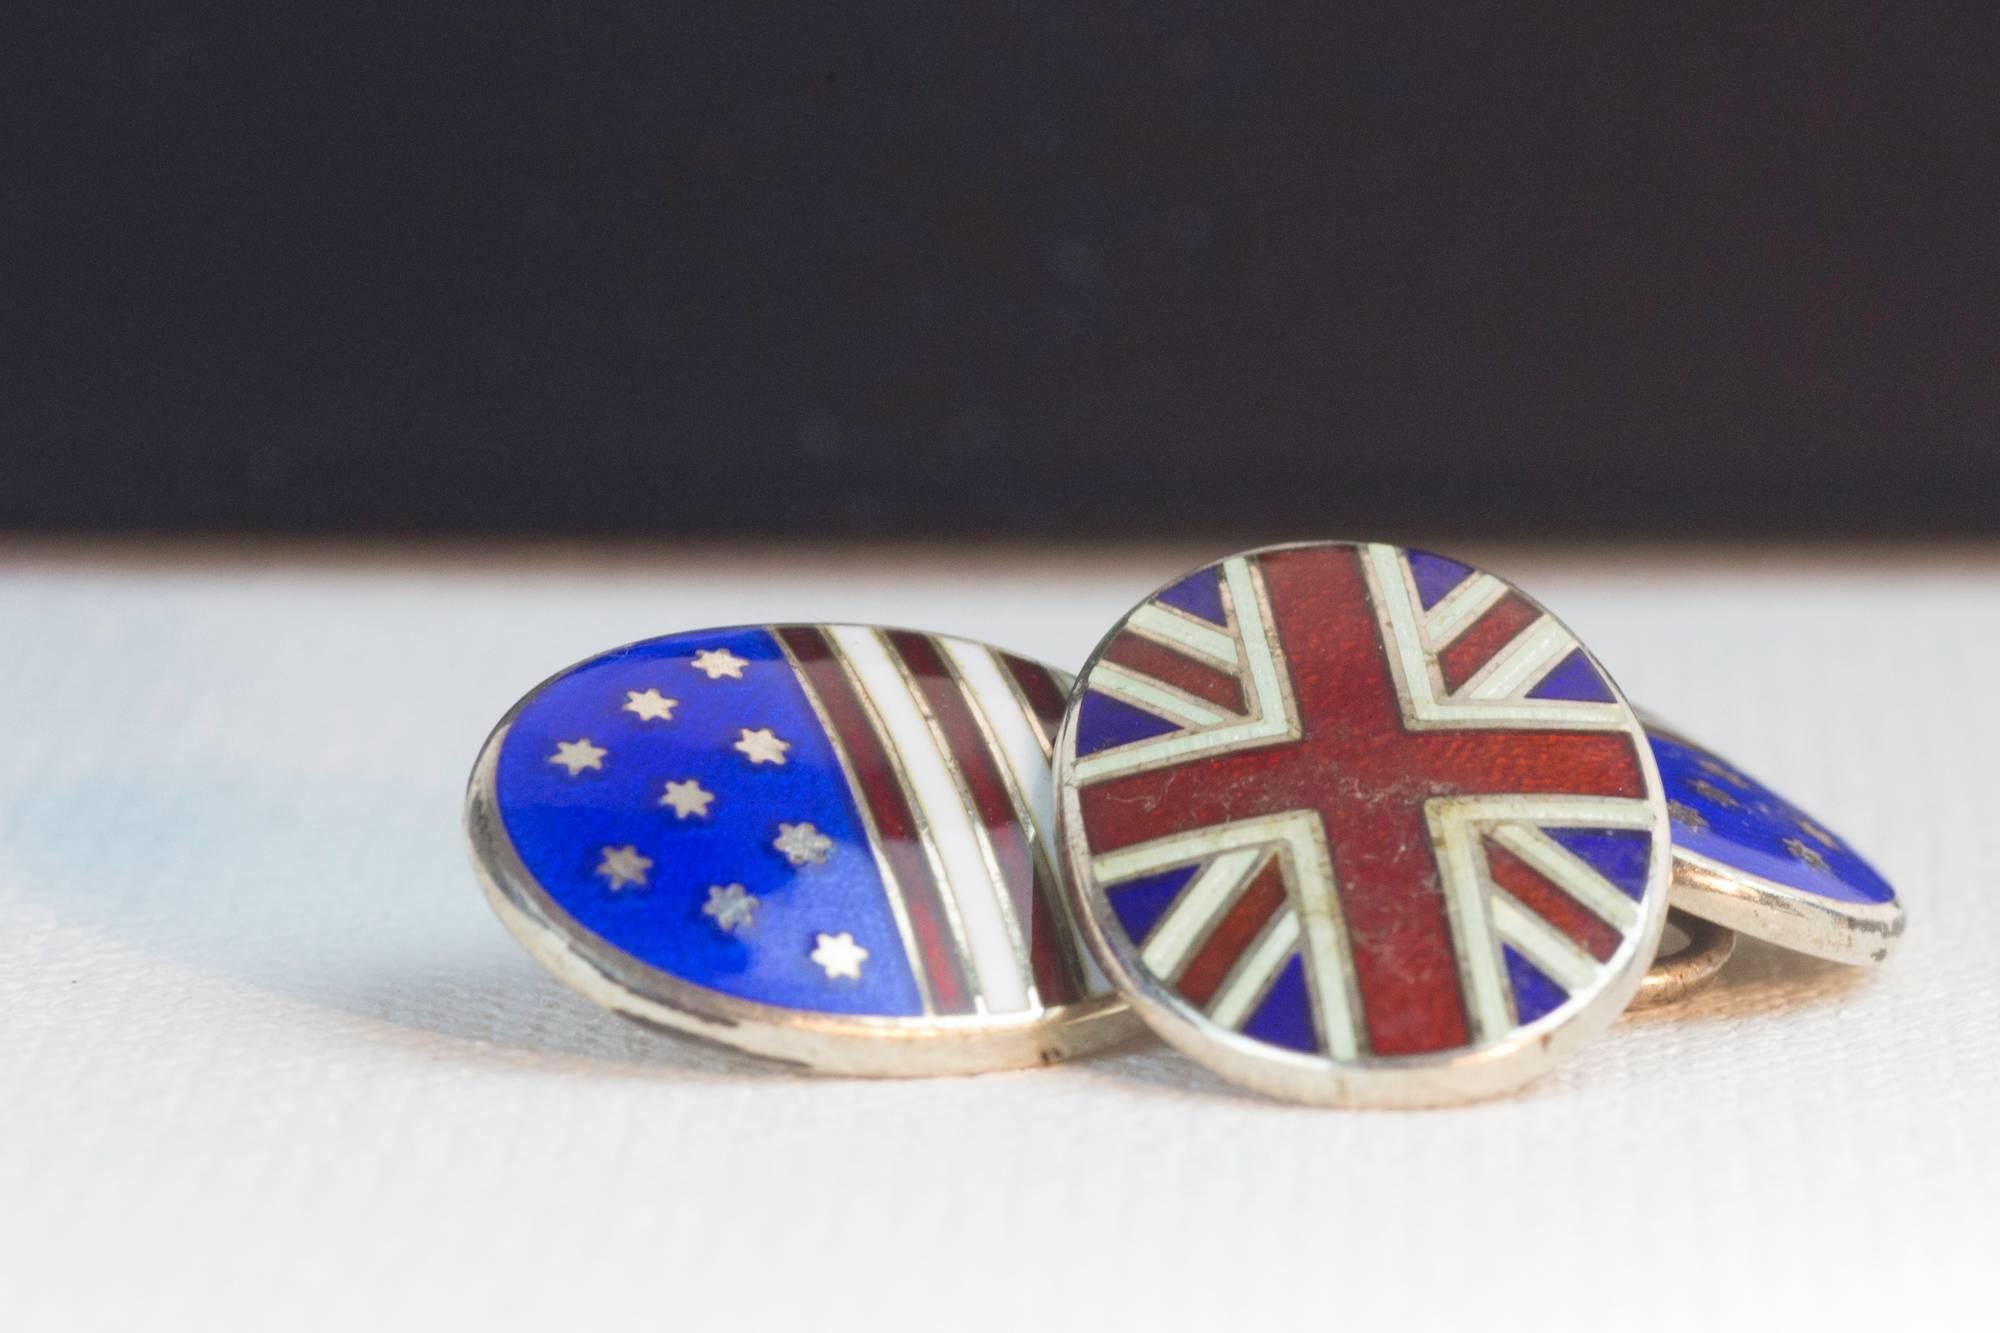 This set of patriotic cuff links was personally owned and worn by the late Tom Foley, former Speaker of the House. These cufflinks are made of silver and enameled with the flags of both the U.S.A. and Great Britain on each. The oval plates are